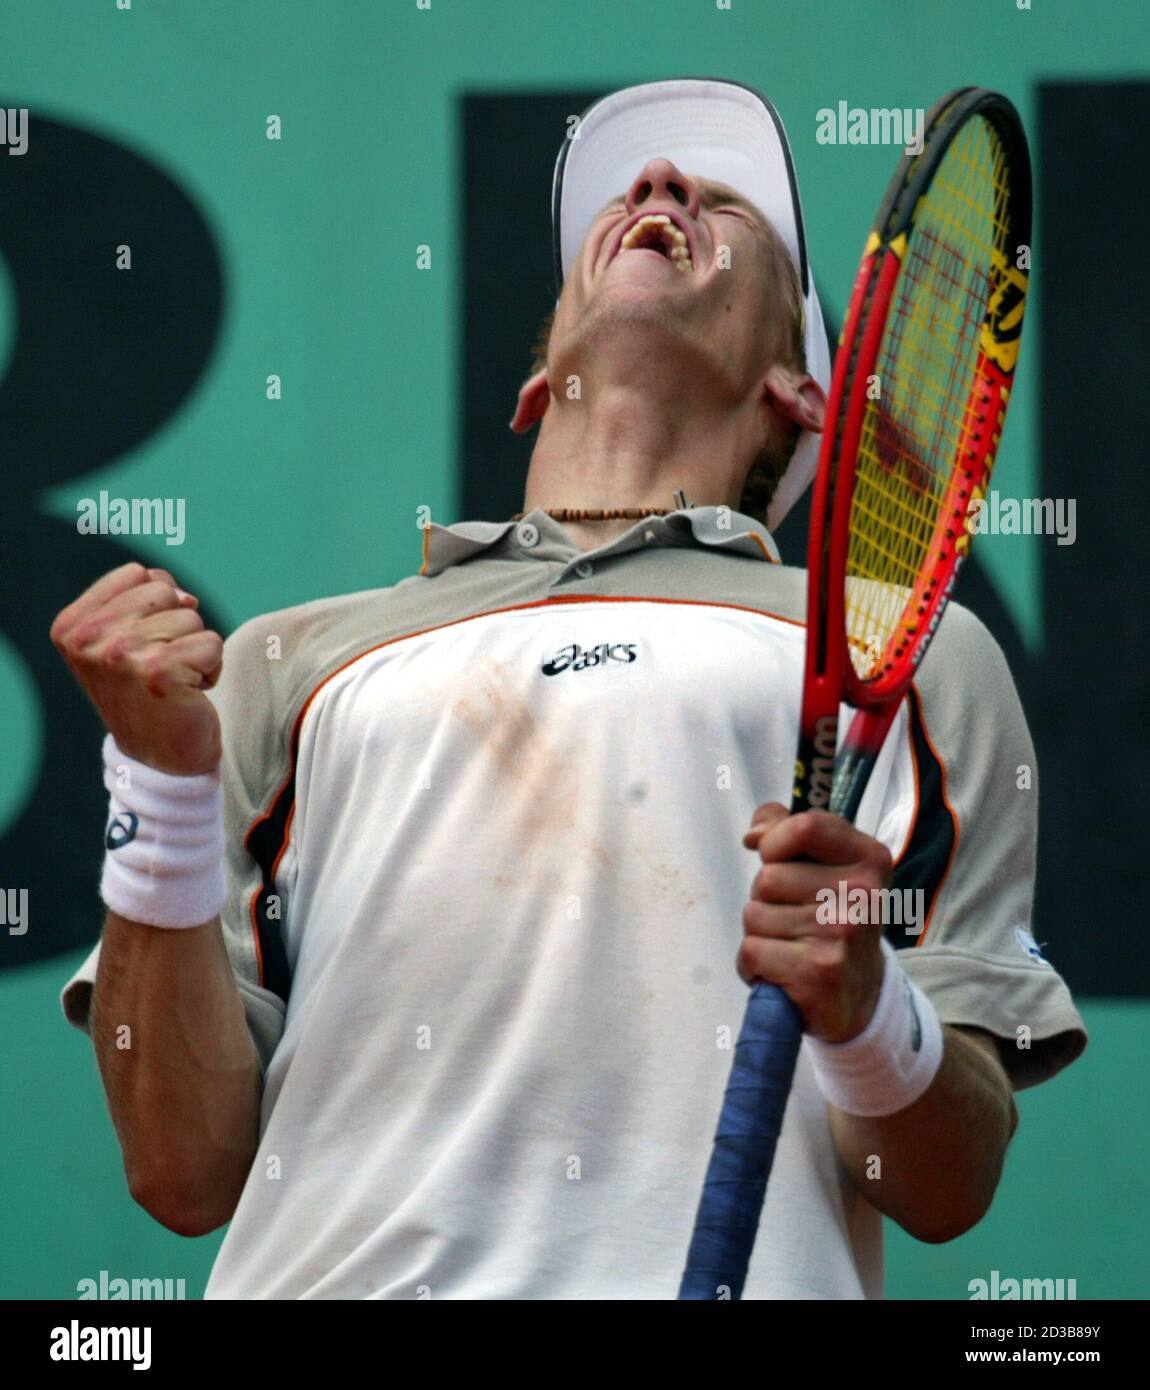 Jarko Nieminen of Finland reacts after defeating Julien Varlet of France at  the French tennis Open